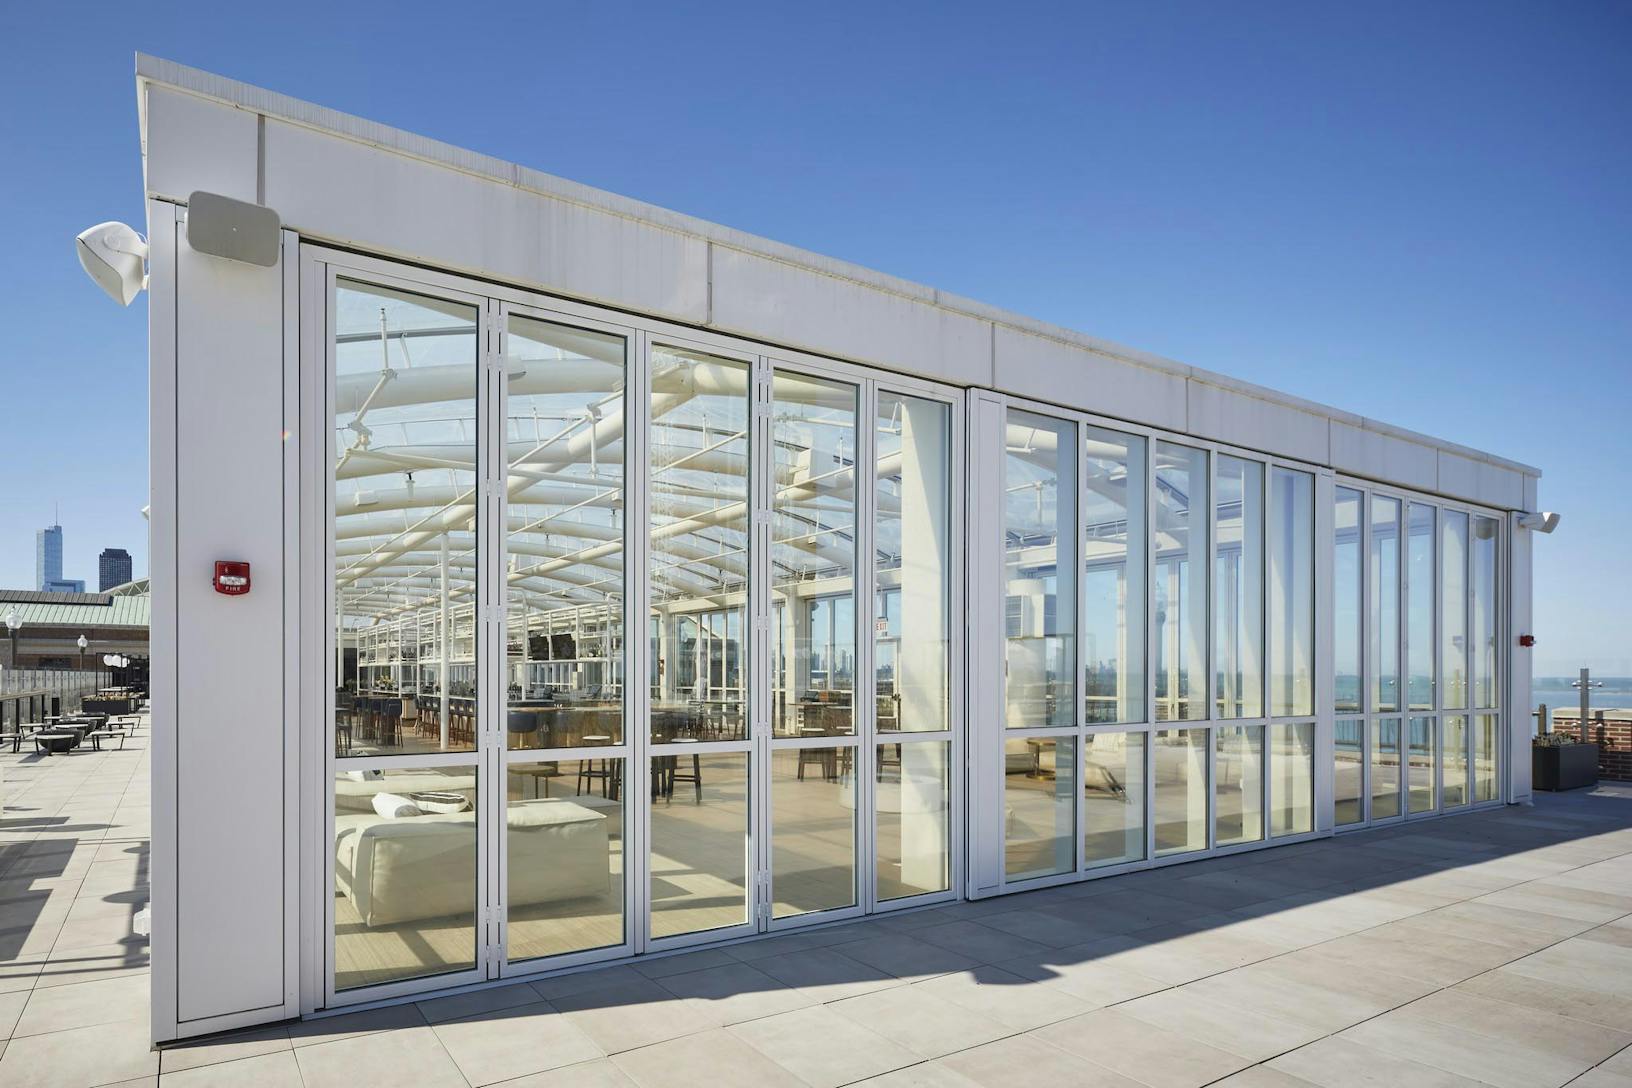 SL70 large offshore navy pier building exterior with large opening glass walls